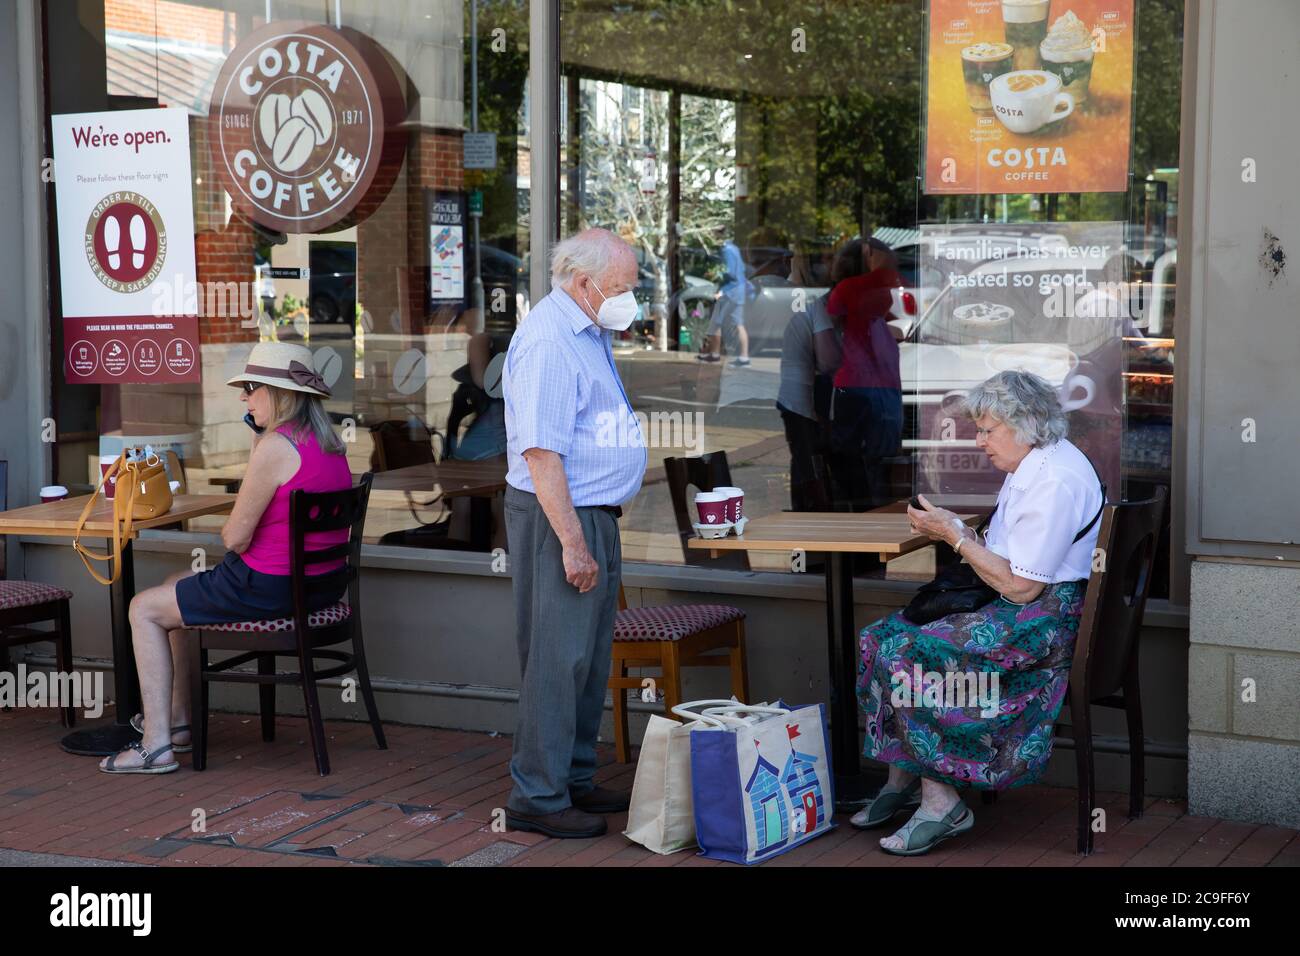 Sevenoaks,Kent,31st July 2020,People dine Alfresco outside Costa Coffee on the Hottest Day of the year in Sevenoaks, Kent. The forecast is for 32C sunny with a gentle breeze and is to be cooler for the weekend.Credit: Keith Larby/Alamy Live News Stock Photo